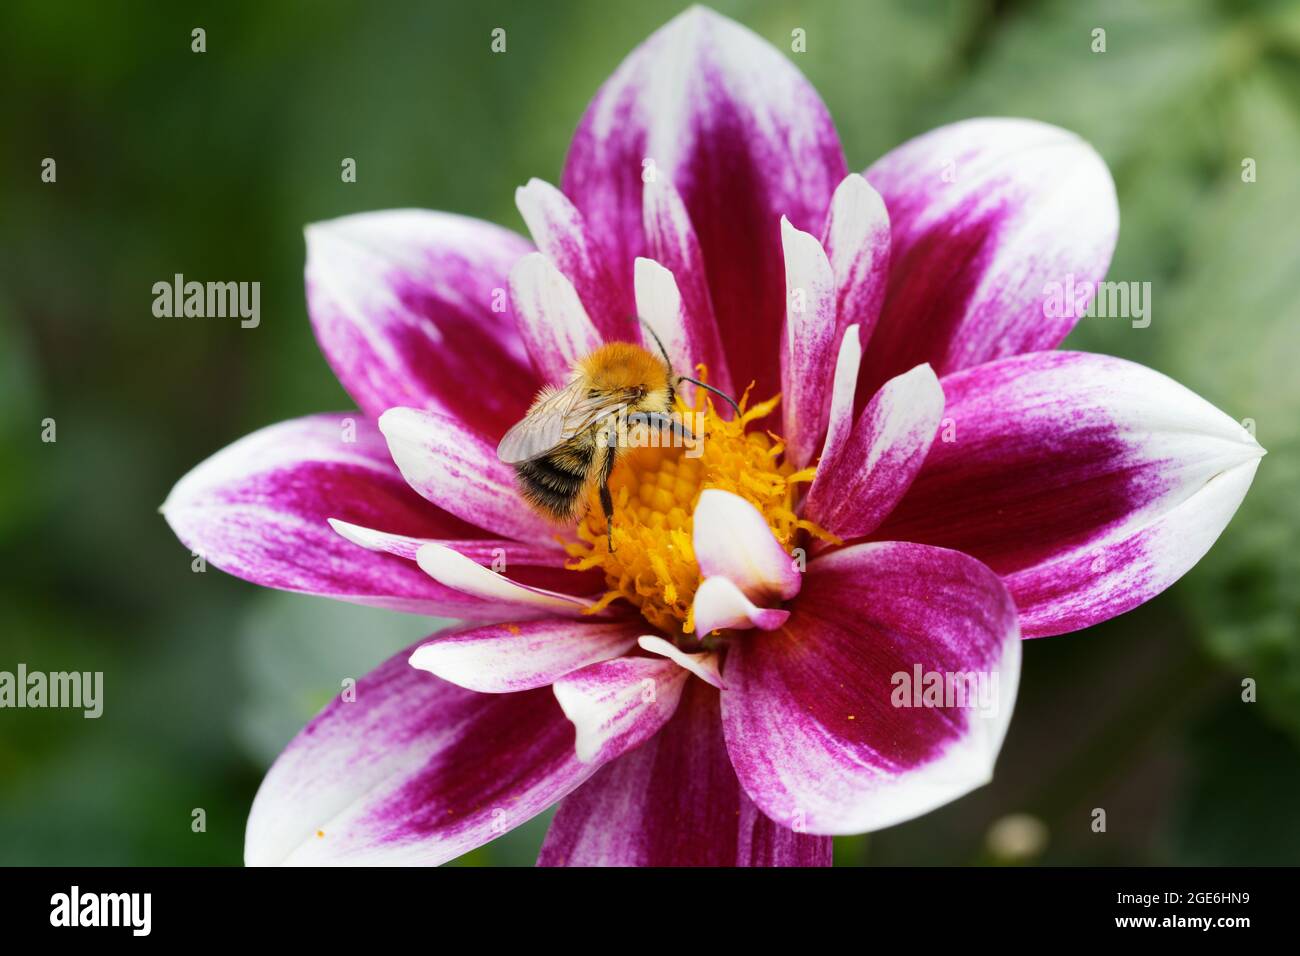 a hairy wild bee on a flowering dahlia Stock Photo